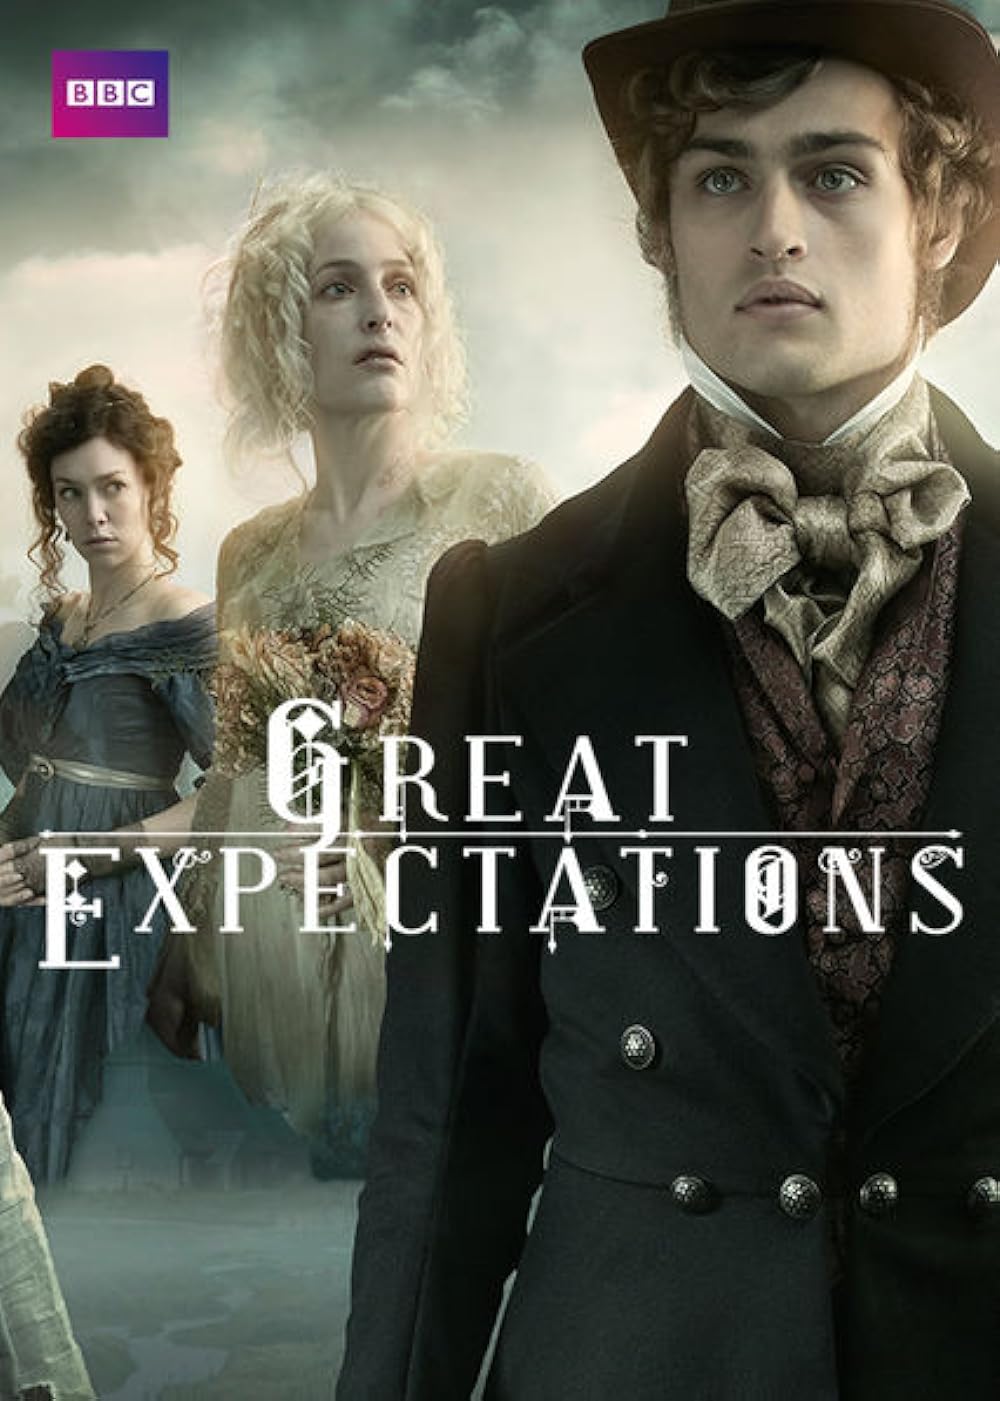 Great Expectations (2011) Torrent Download EZTV